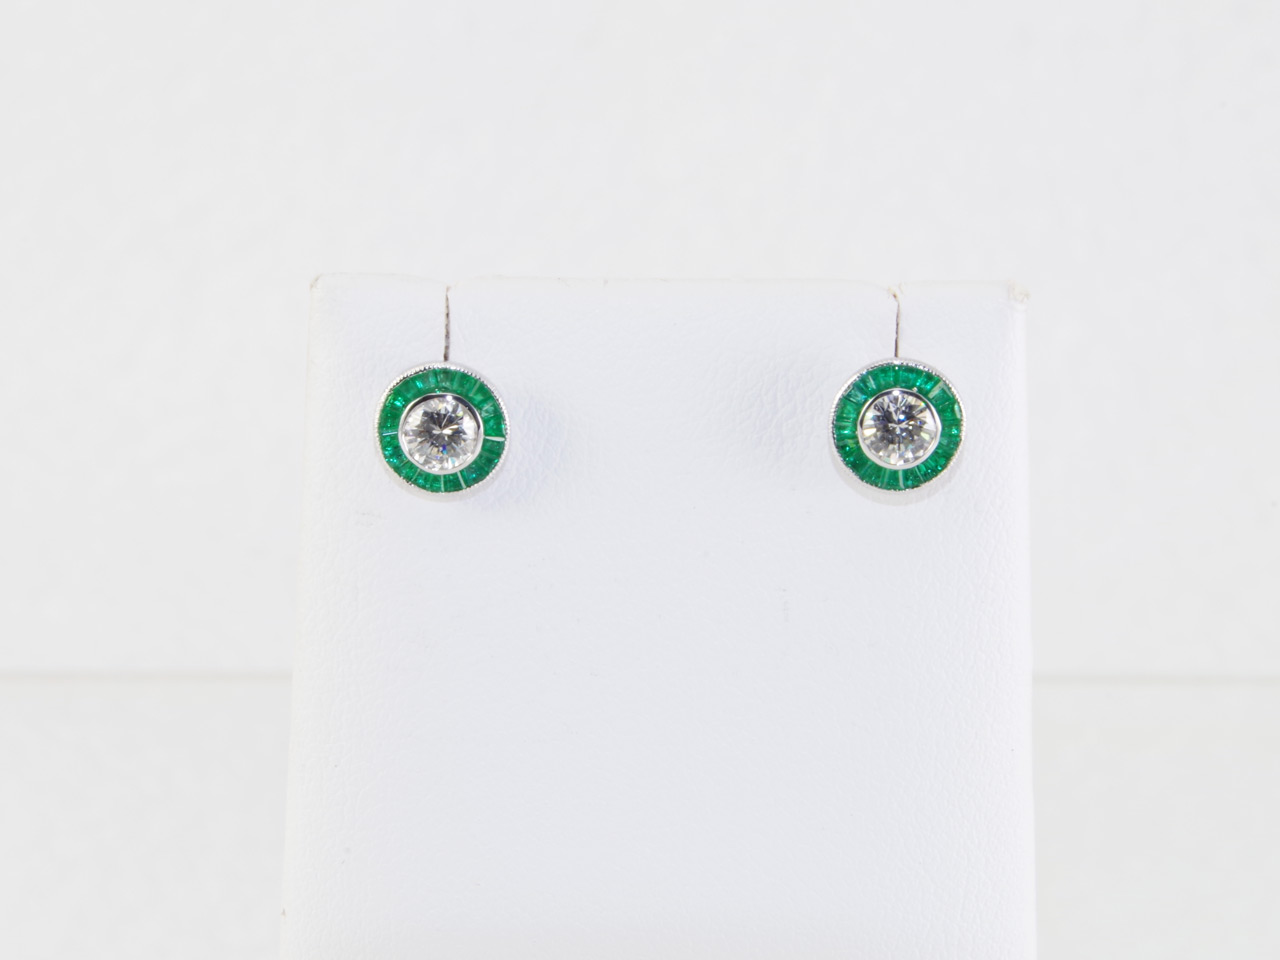 Pair of 14k white gold halo Diamond earring, with two I-J color, VS1-2 clarity, round brilliant cut Diamonds. The Diamonds have a total weight of .51 carat, and are bezel set. In addition, there are thirty-six channel set custom emeralds, with a total wei